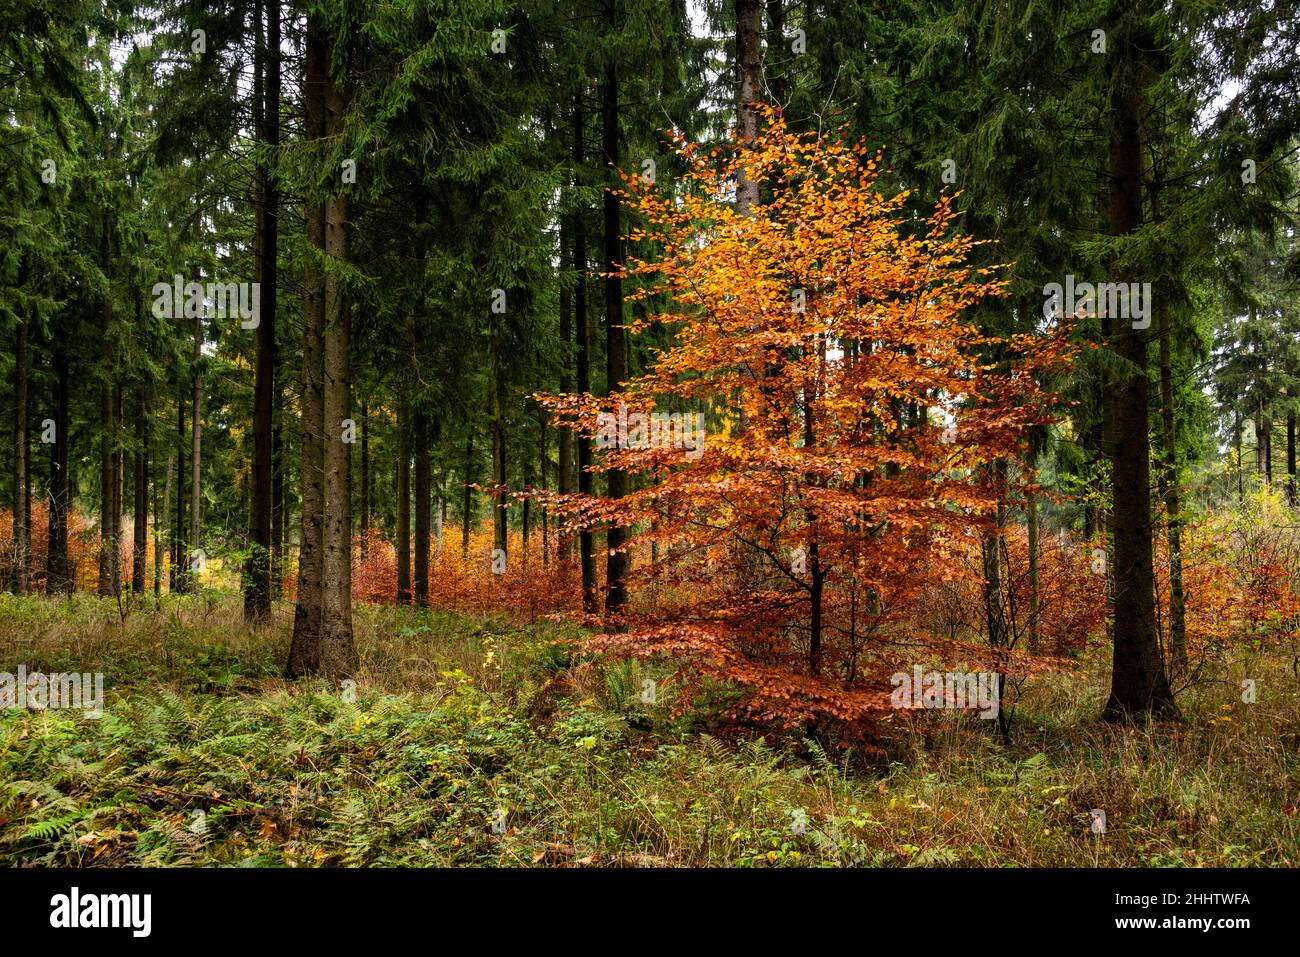 Single beech tree with autumn leaves, forming a beautiful contrast to the dark green of the surrounding coniferous forest, Süntel, Germany Stock Photo